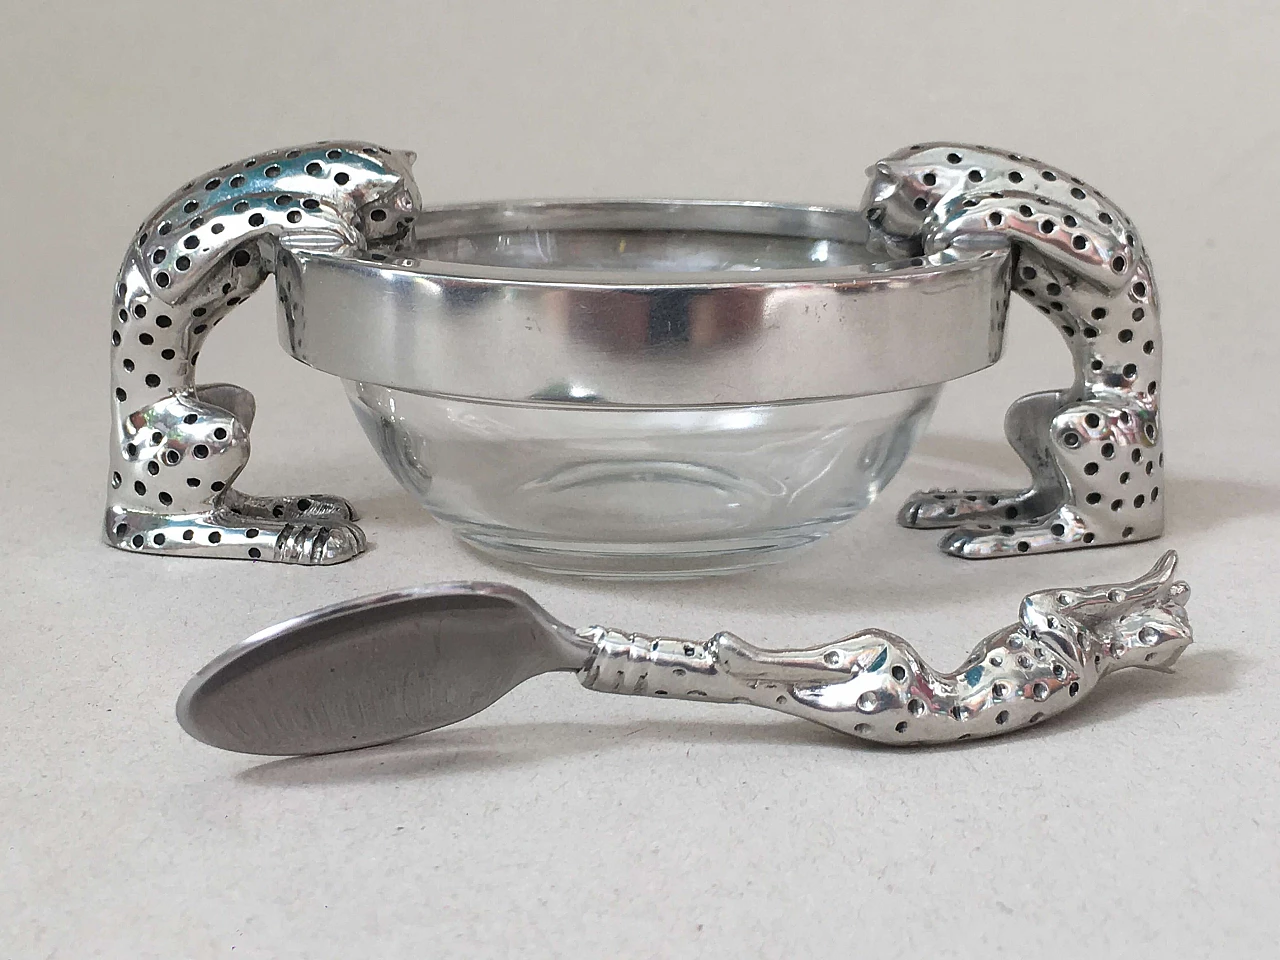 Glass and metal bowl and spoon with cheetahs 7